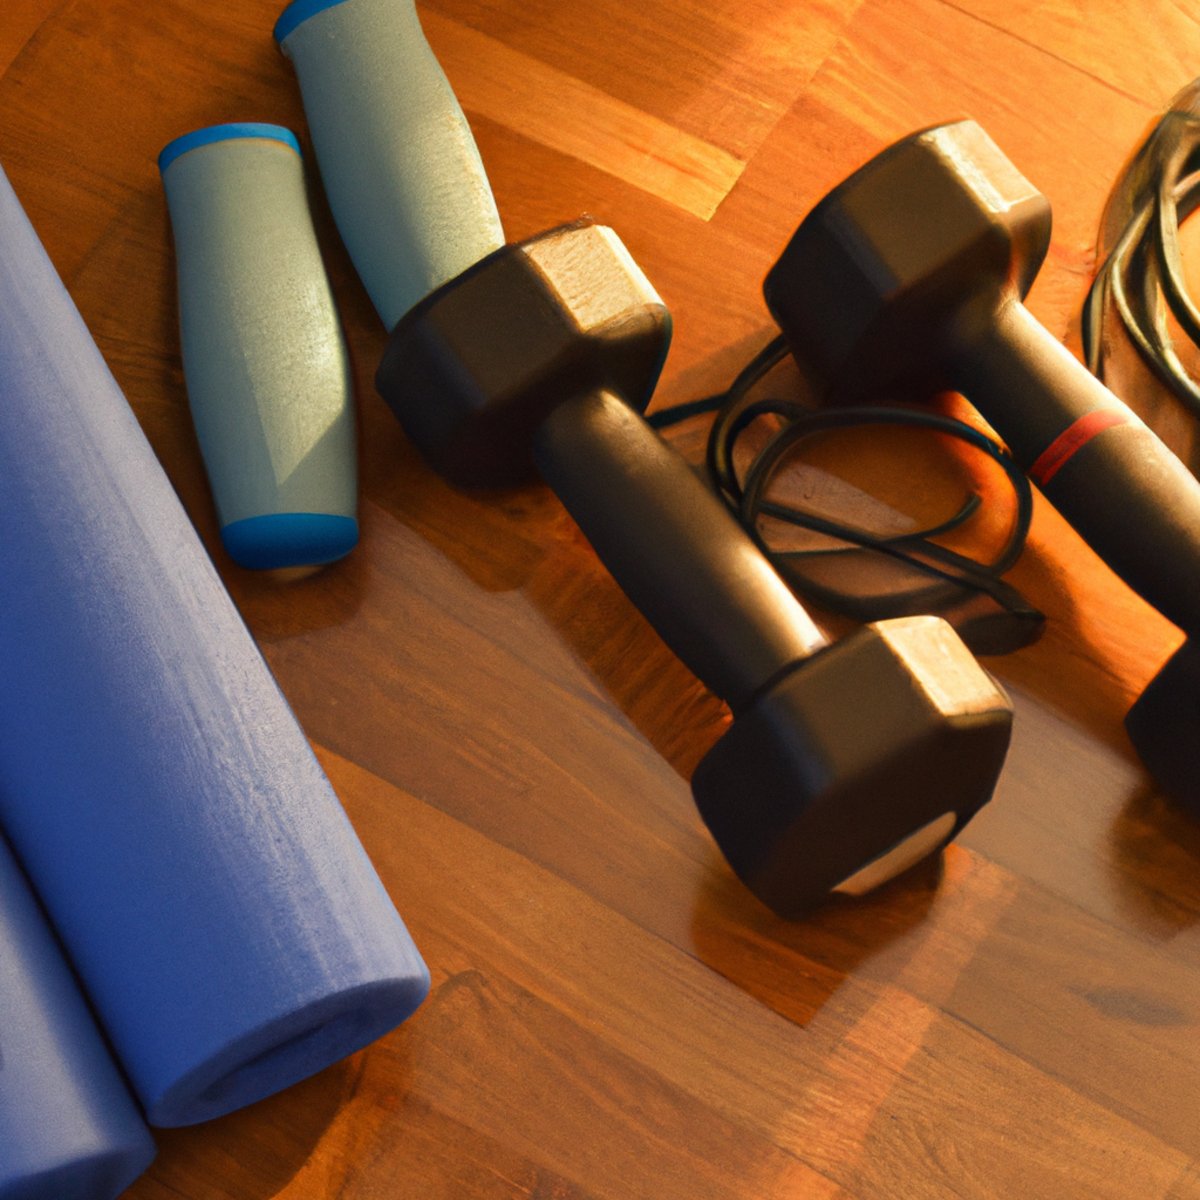 The photo features a set of dumbbells, a jump rope, and a yoga mat arranged neatly on a hardwood floor. The dumbbells are of varying weights, with the heaviest ones placed at the back. The jump rope is coiled up and placed on top of the yoga mat, which is unrolled and ready for use. The lighting in the photo is bright and natural, highlighting the texture of the wood and the vibrant colors of the equipment. The composition of the photo suggests a sense of order and preparation, inviting the reader to imagine themselves engaging in a rigorous and effective HIIT workout.